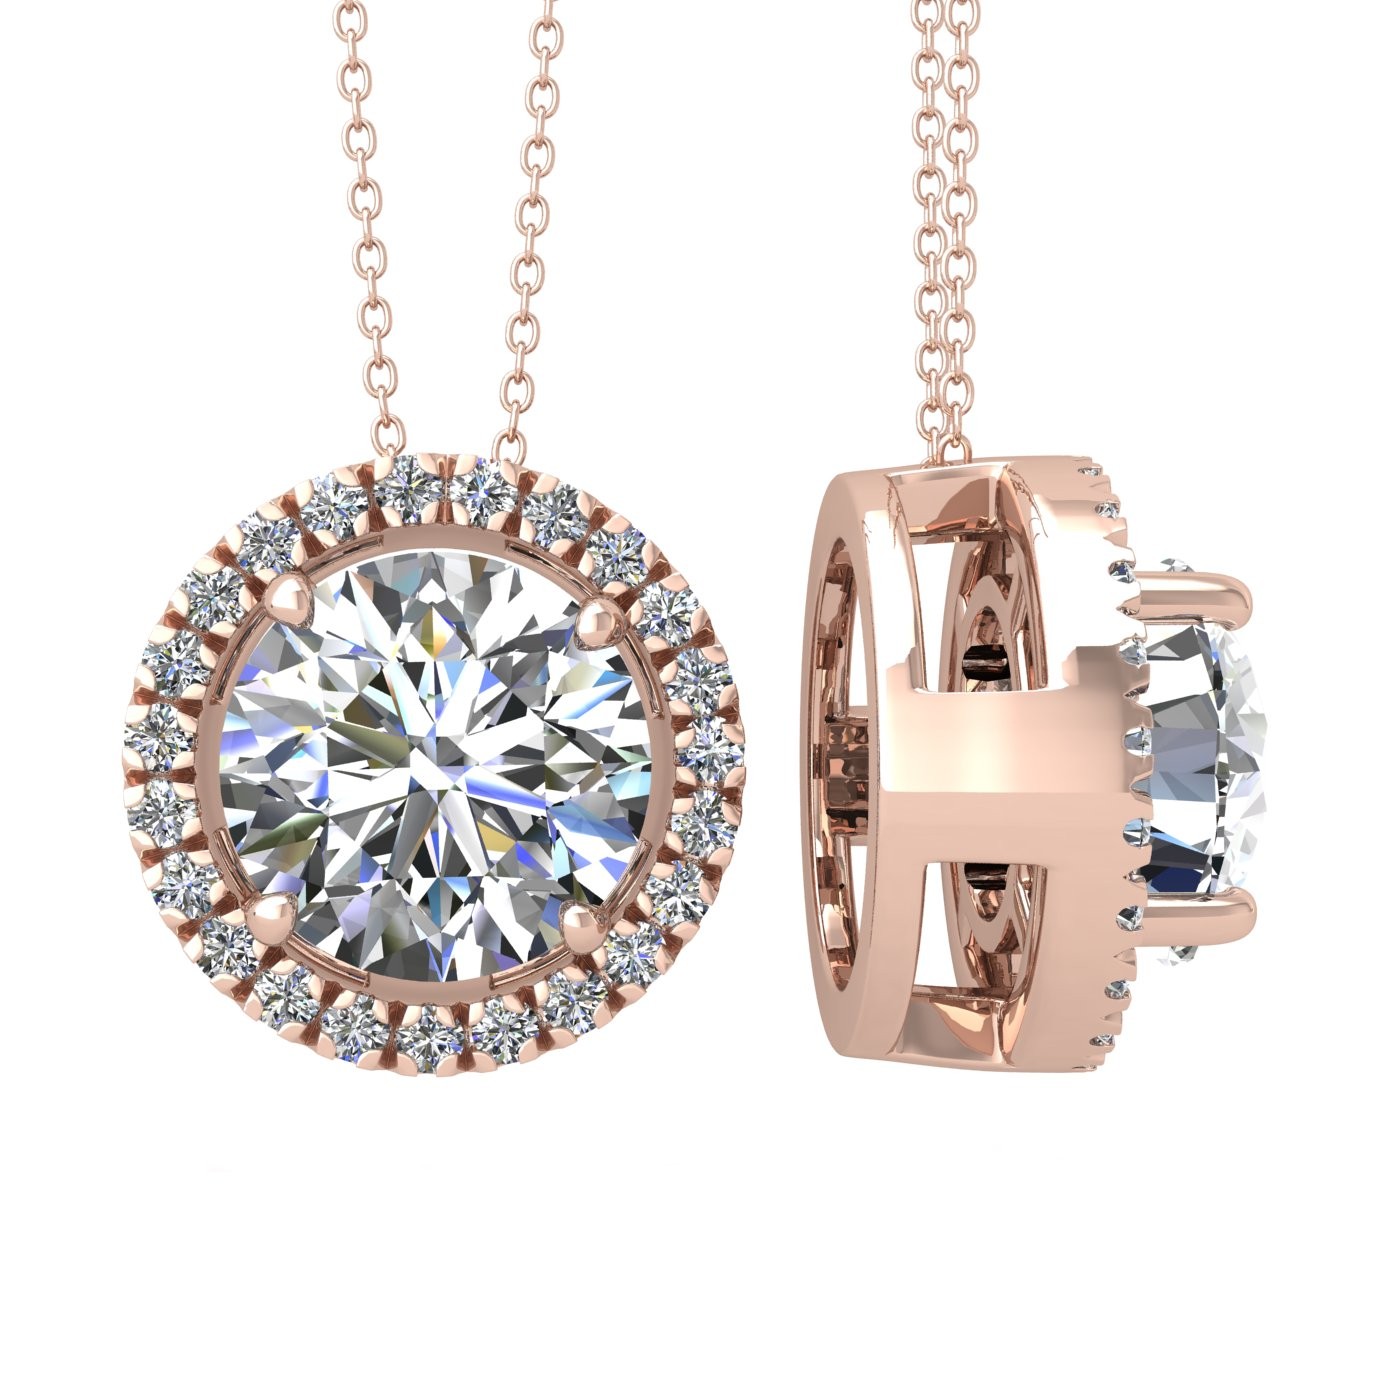 18k rose gold 2 ct 4 prong round shape diamond pendant with diamond pavÉ set halo including chain seperate from the pendant